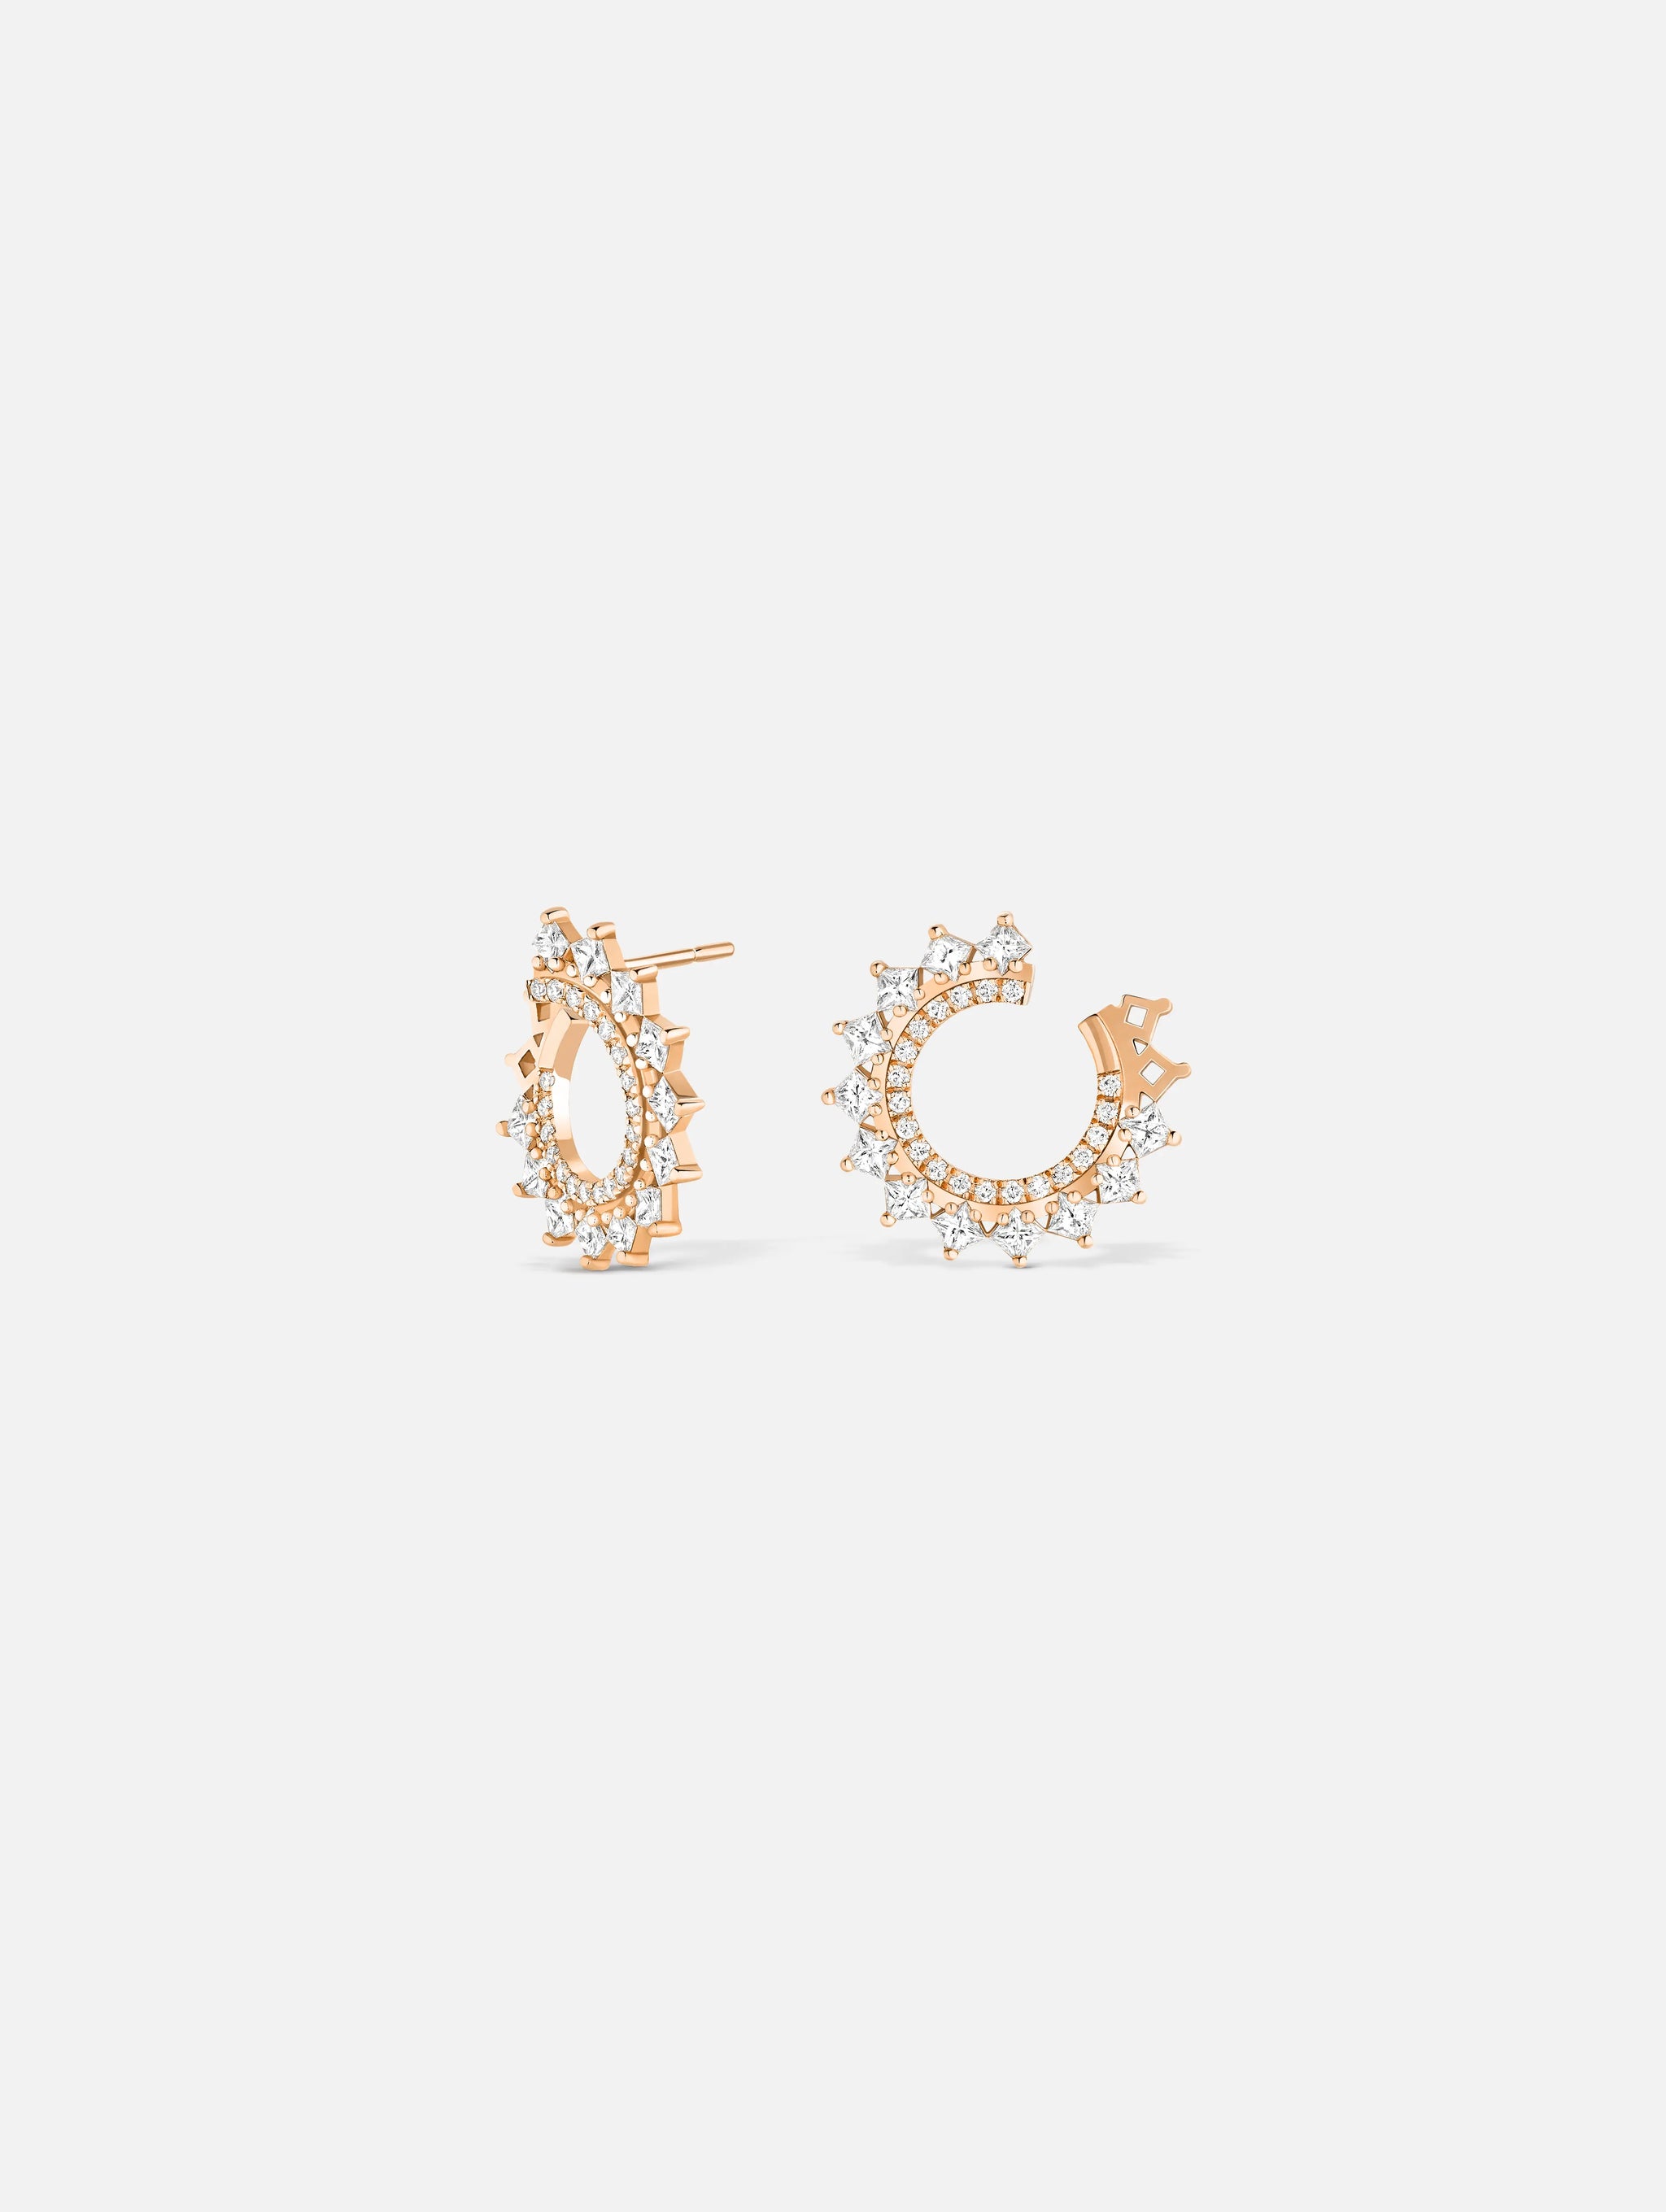 Princess Diamond Earrings in Rose Gold - 1 - Nouvel Heritage